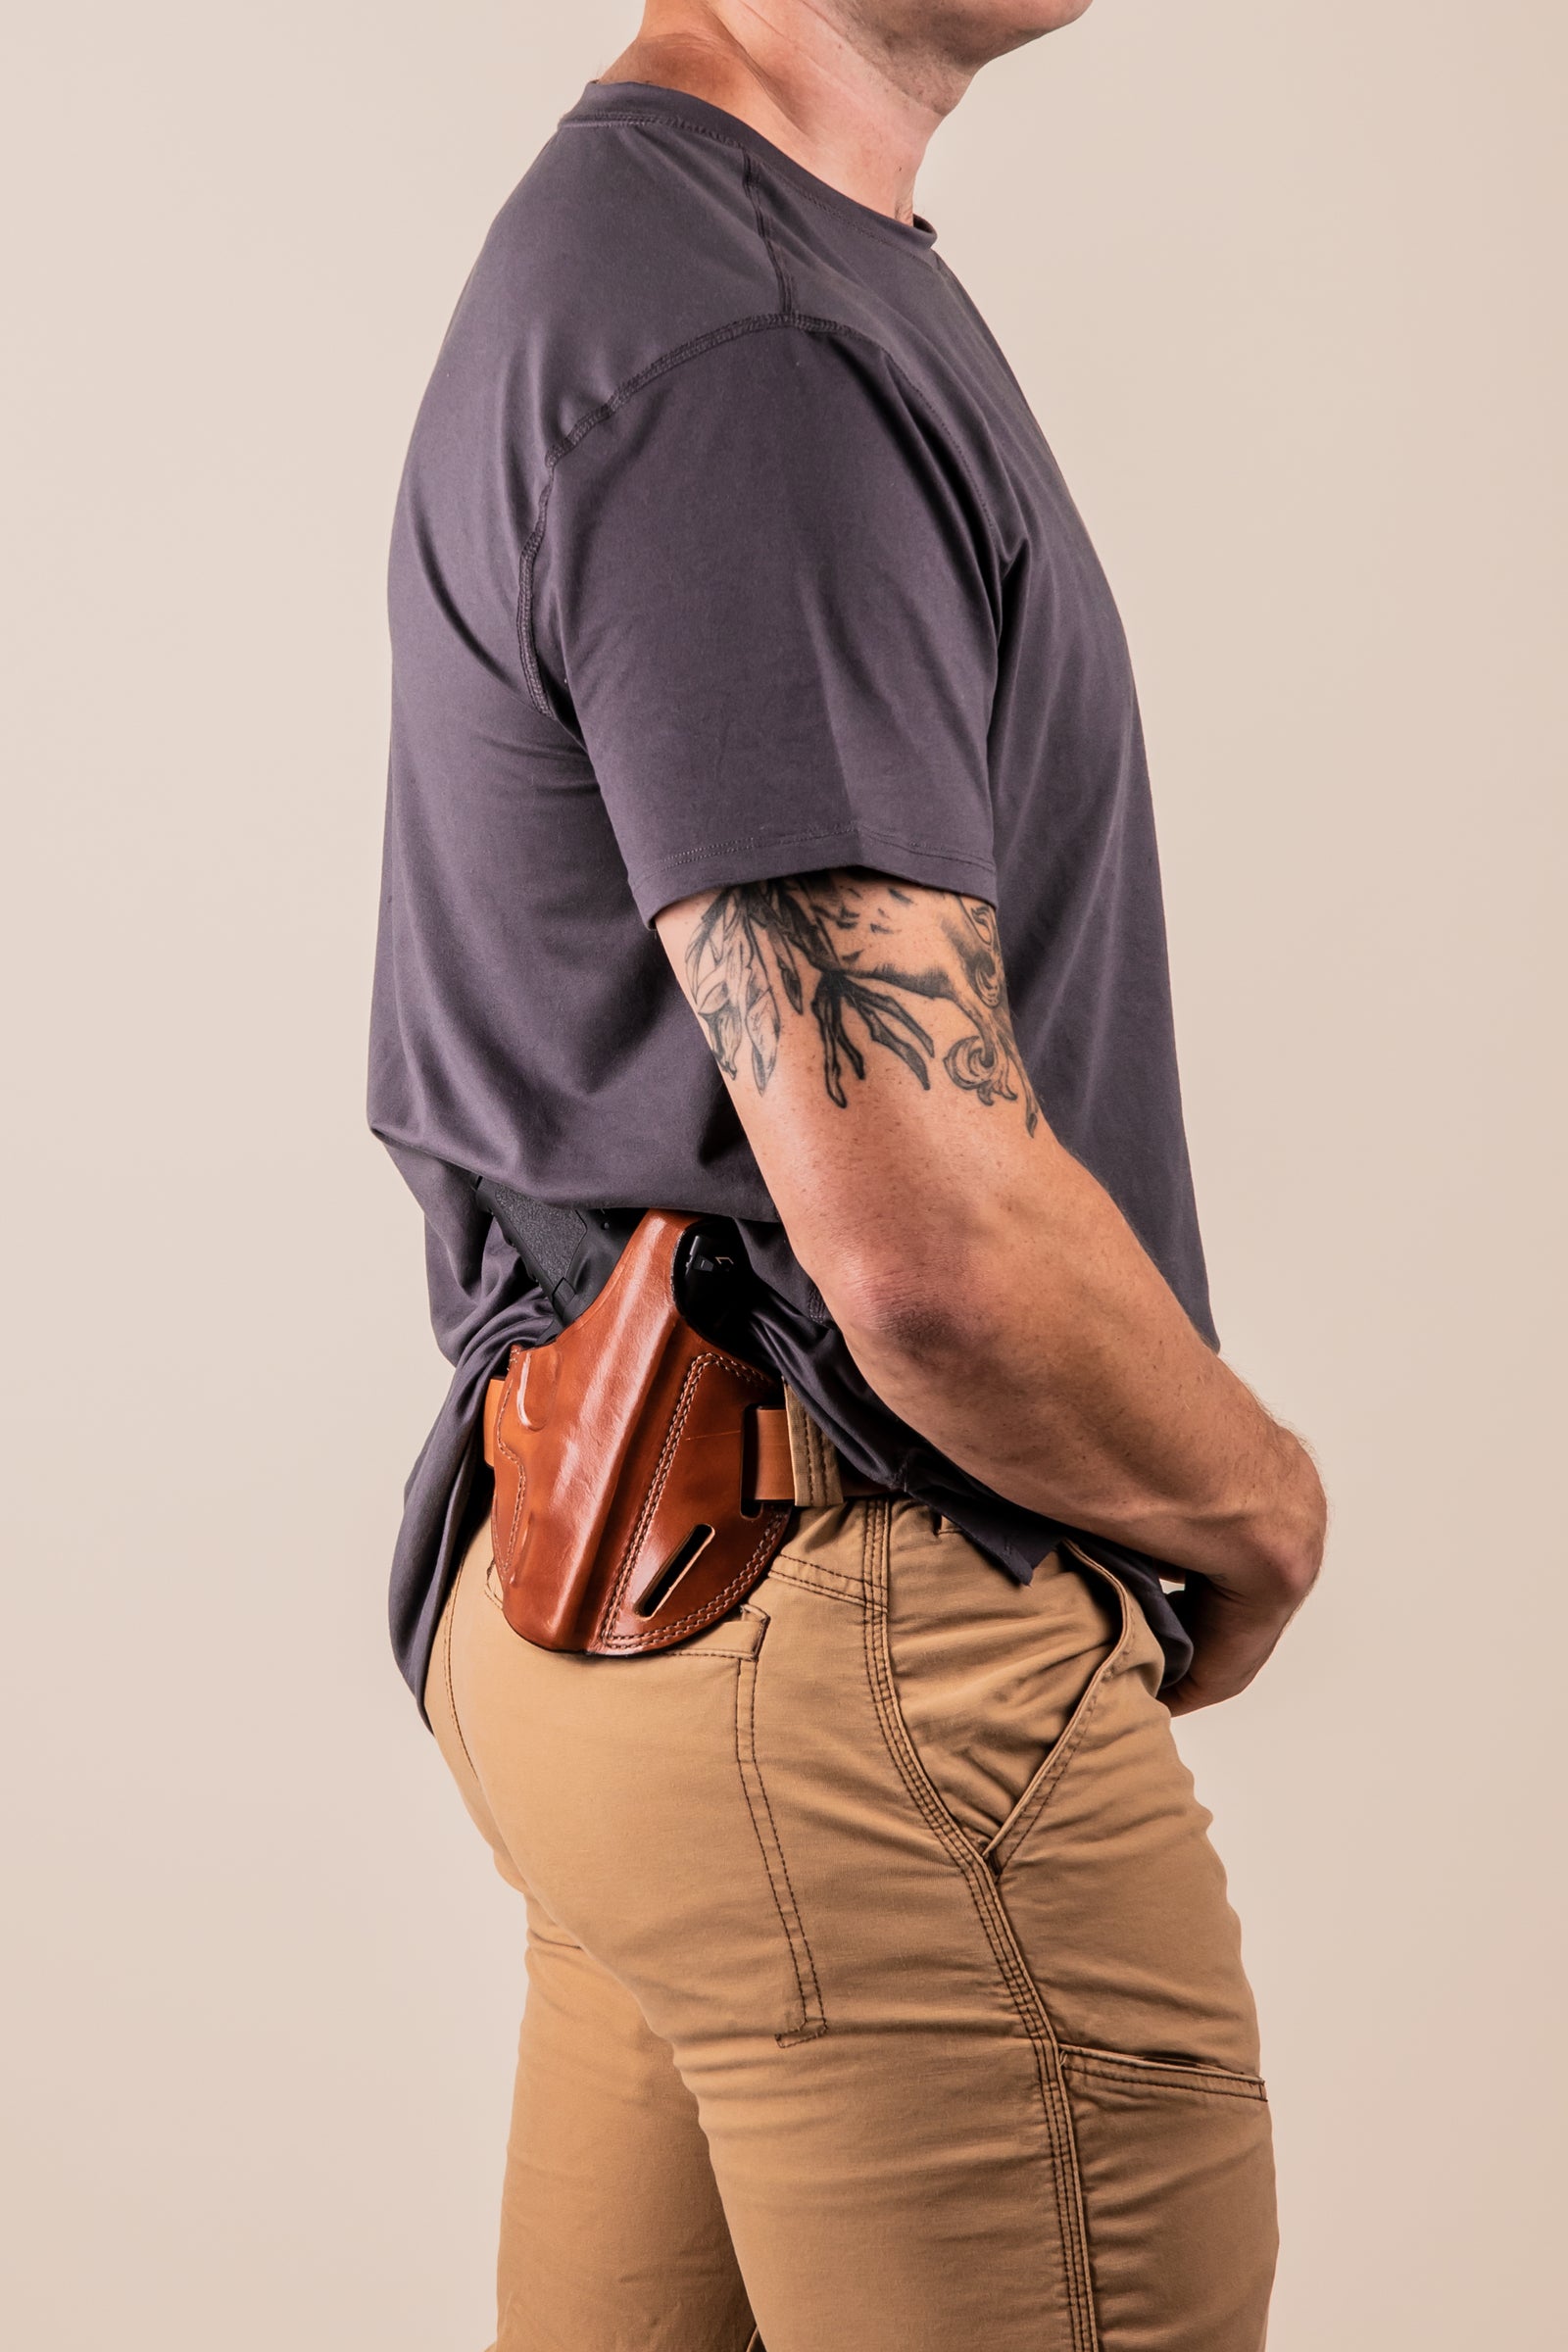 Discover Superior Quality with the Shadow® II Holster